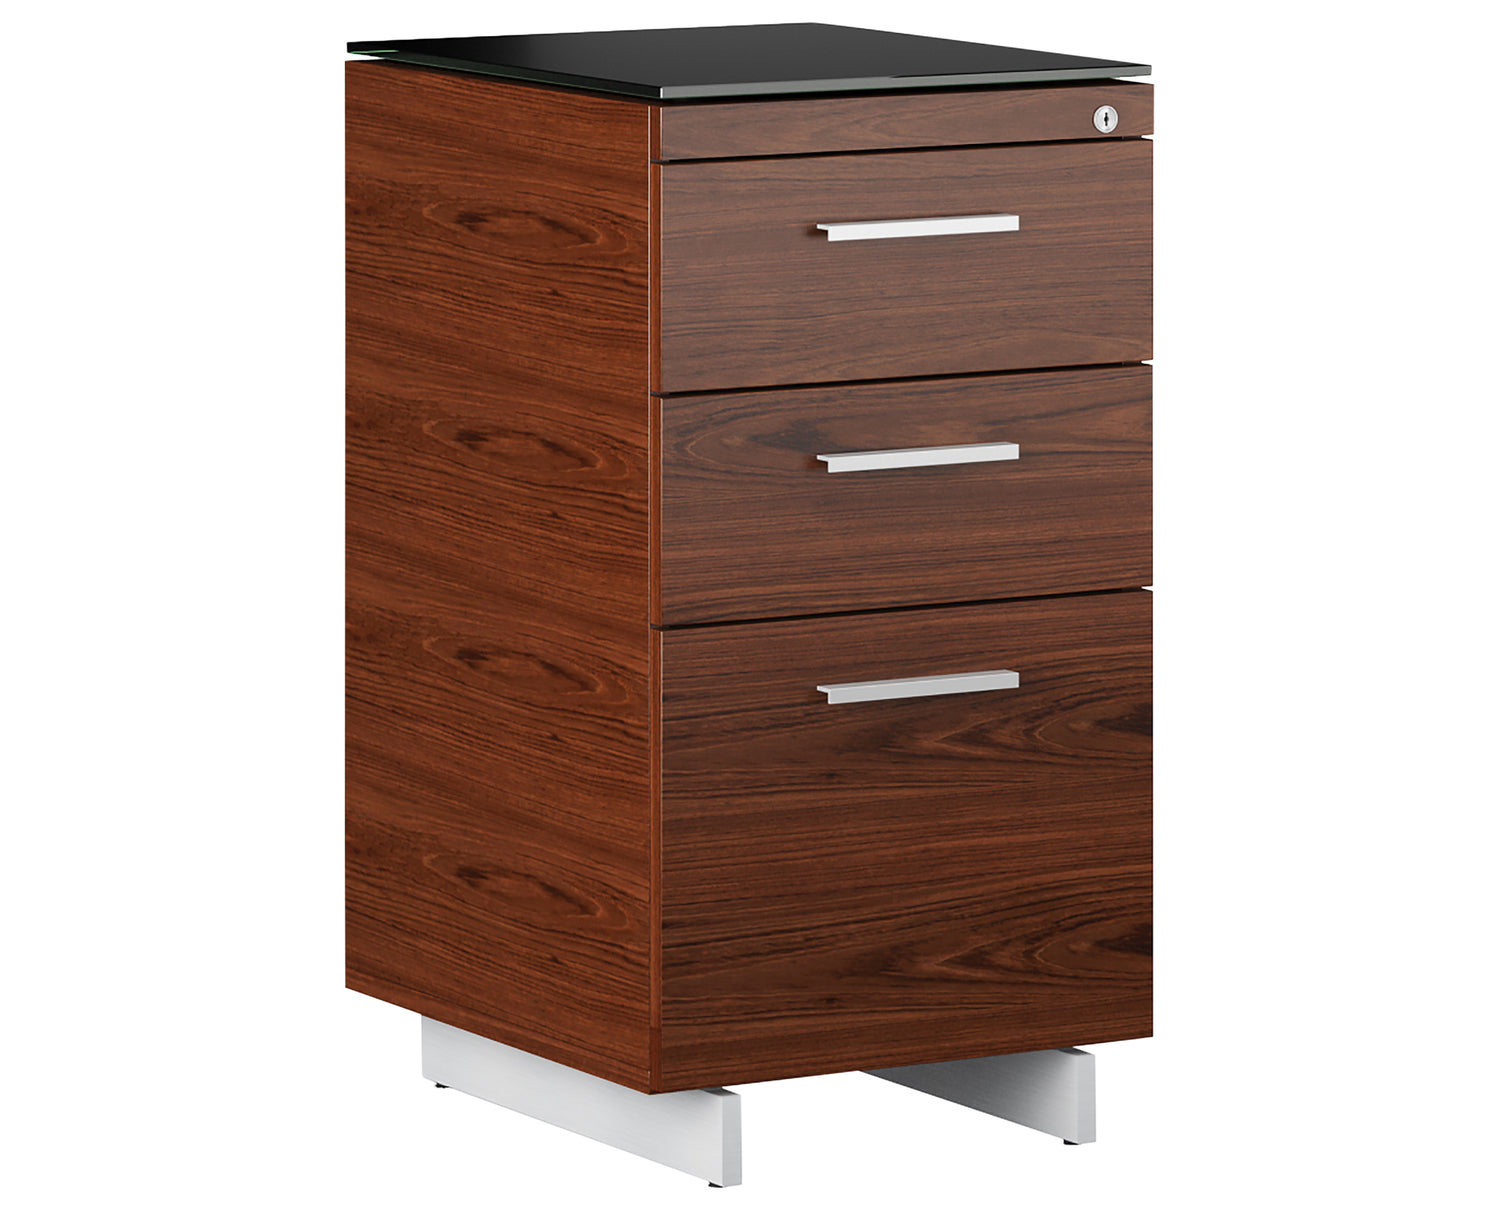 Chocolate Walnut Veneer and Black Satin-Etched Glass with Satin Nickel Steel | BDI Sequel 3 Drawer File Cabinet | Valley Ridge Furniture